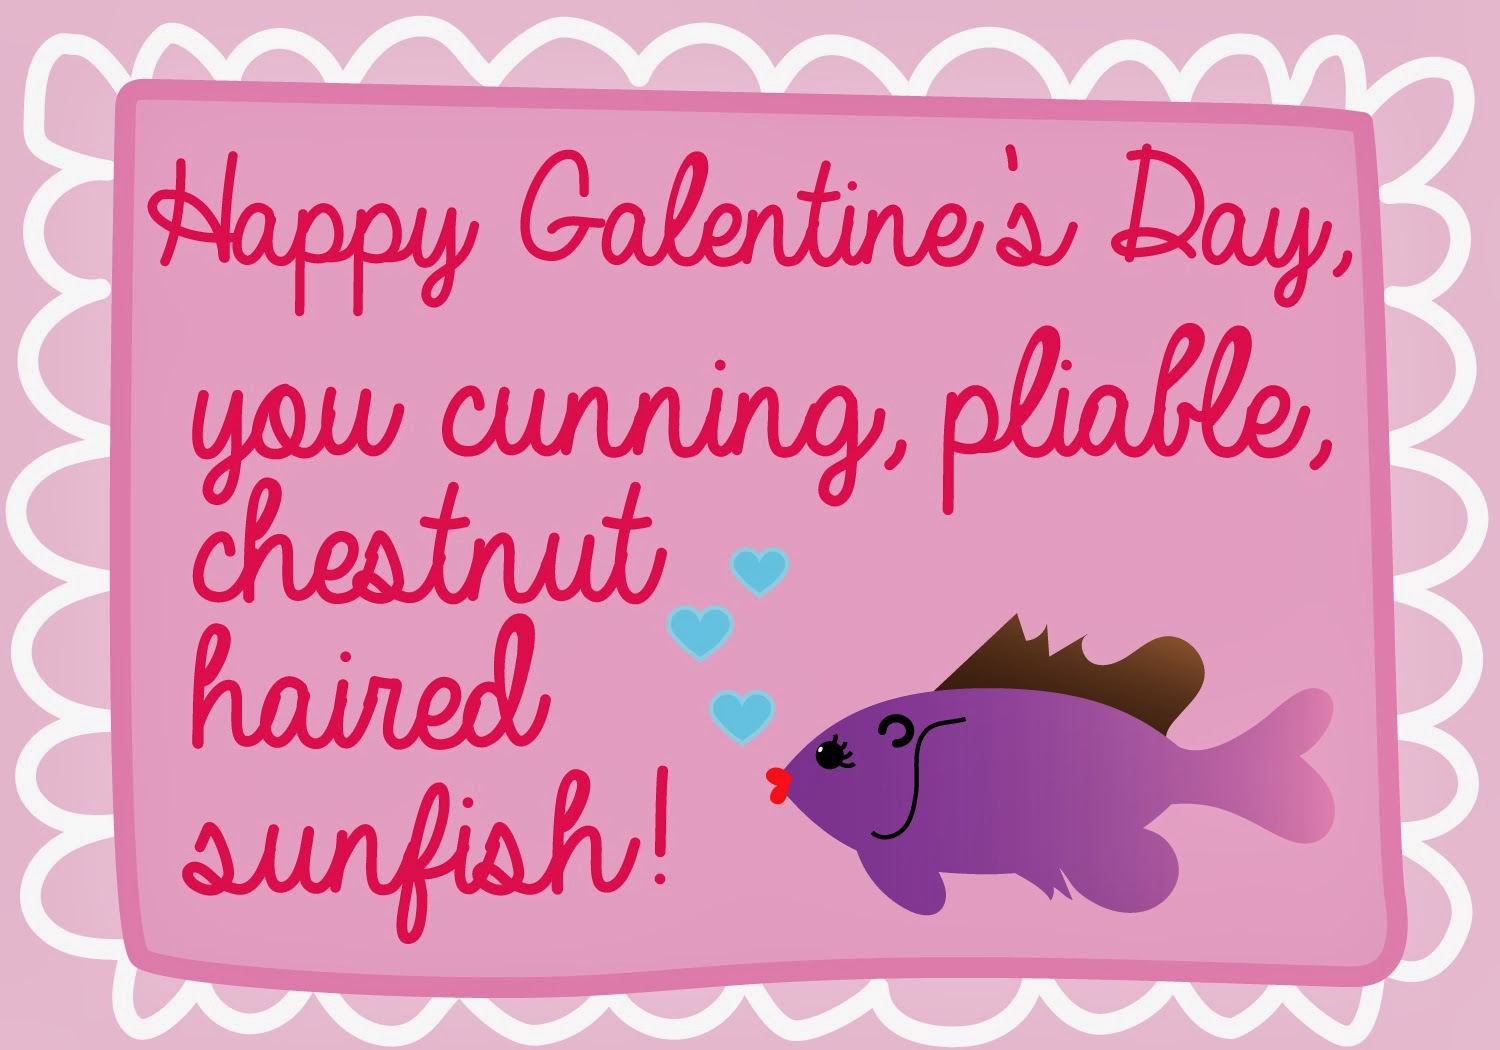 ... with Caitlin: Happy (belated) Galentine's Day!